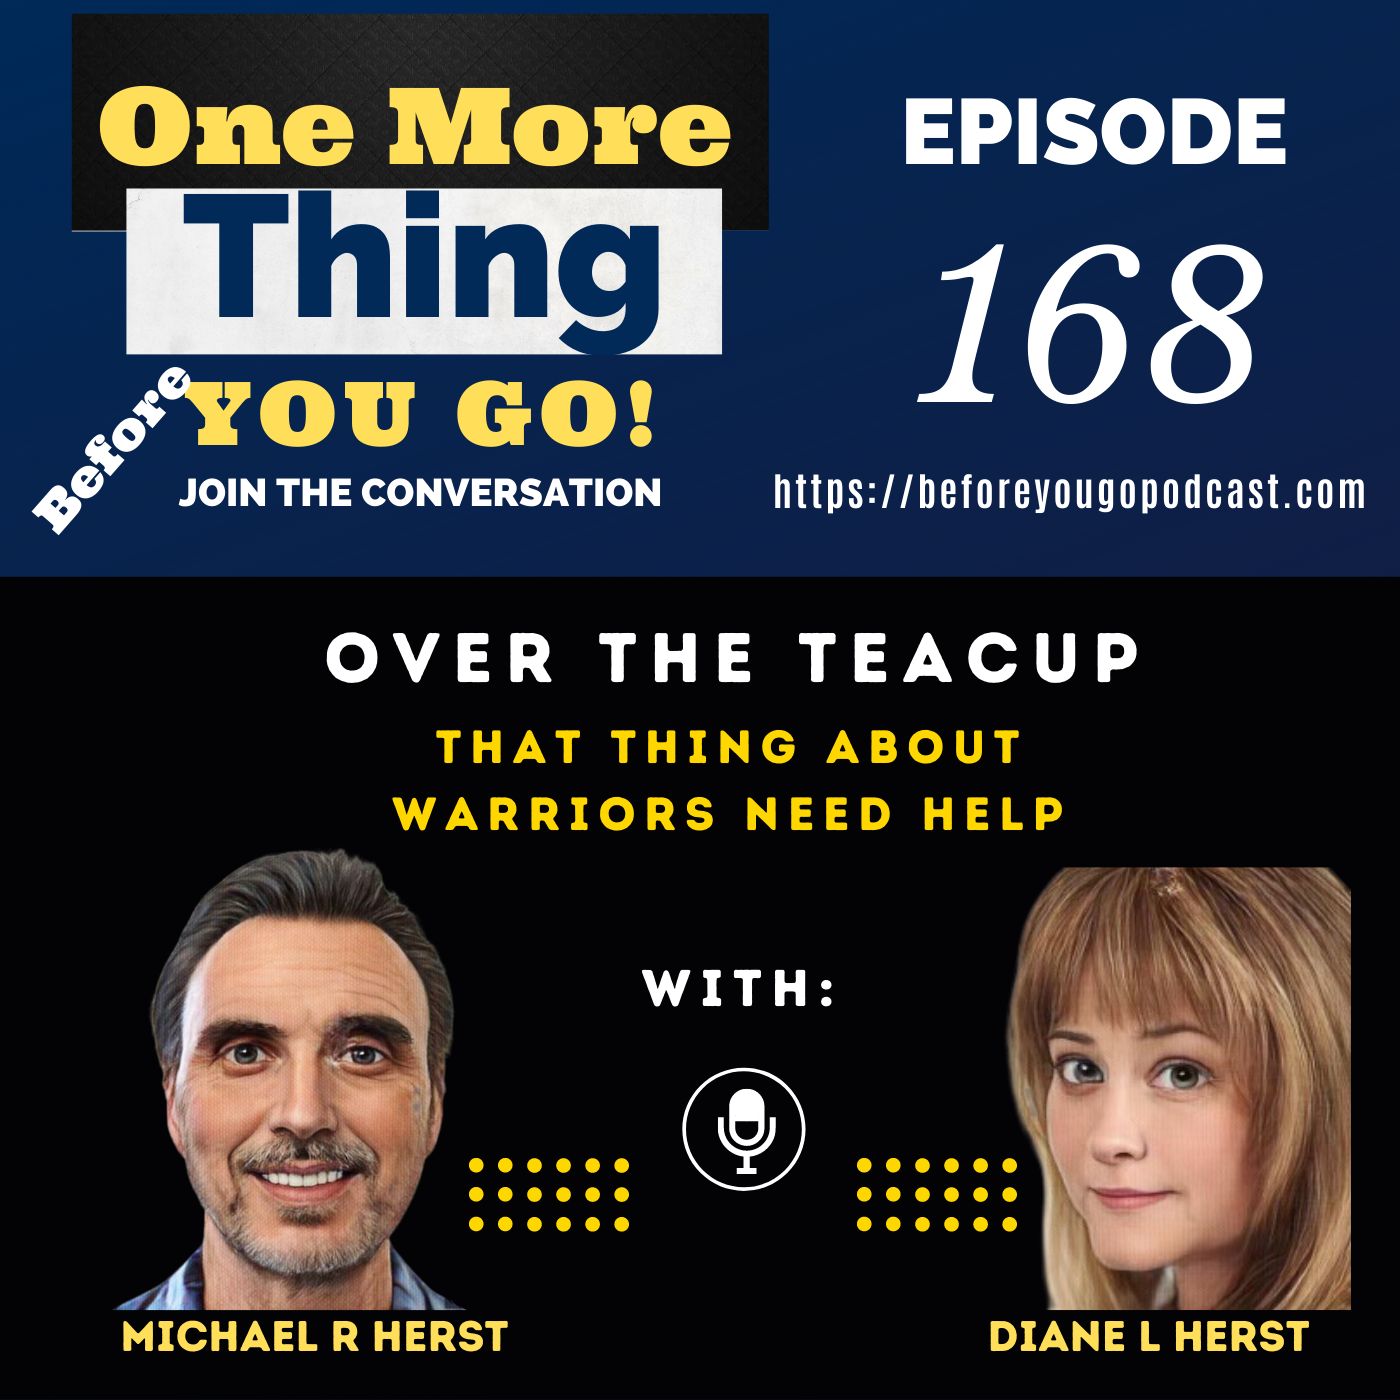 That Thing About -Over the Teacup - "When Warriors Need Help"